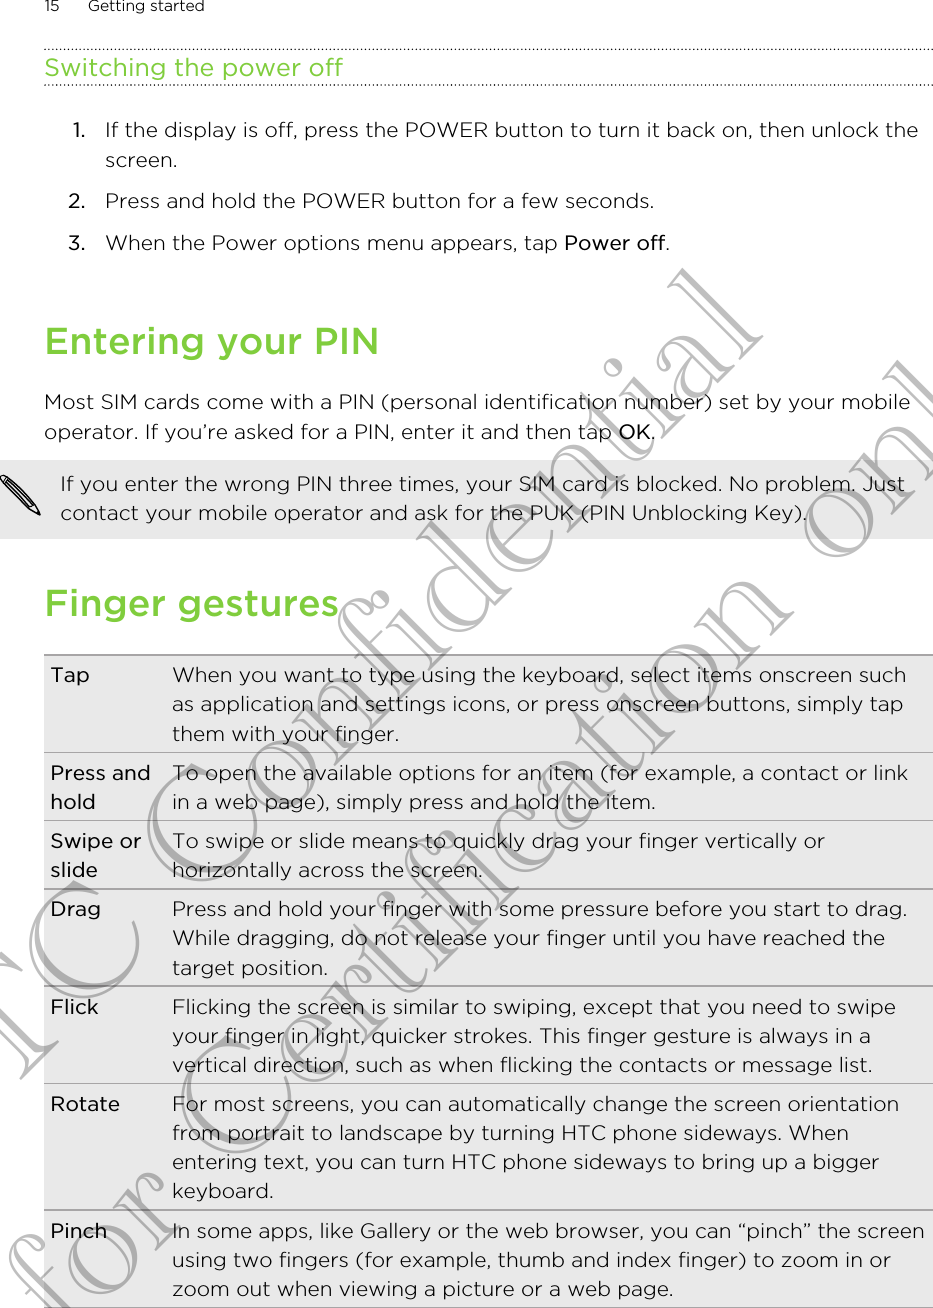 Switching the power off1. If the display is off, press the POWER button to turn it back on, then unlock thescreen.2. Press and hold the POWER button for a few seconds.3. When the Power options menu appears, tap Power off.Entering your PINMost SIM cards come with a PIN (personal identification number) set by your mobileoperator. If you’re asked for a PIN, enter it and then tap OK.If you enter the wrong PIN three times, your SIM card is blocked. No problem. Justcontact your mobile operator and ask for the PUK (PIN Unblocking Key).Finger gesturesTap When you want to type using the keyboard, select items onscreen suchas application and settings icons, or press onscreen buttons, simply tapthem with your finger.Press andholdTo open the available options for an item (for example, a contact or linkin a web page), simply press and hold the item.Swipe orslideTo swipe or slide means to quickly drag your finger vertically orhorizontally across the screen.Drag Press and hold your finger with some pressure before you start to drag.While dragging, do not release your finger until you have reached thetarget position.Flick Flicking the screen is similar to swiping, except that you need to swipeyour finger in light, quicker strokes. This finger gesture is always in avertical direction, such as when flicking the contacts or message list.Rotate For most screens, you can automatically change the screen orientationfrom portrait to landscape by turning HTC phone sideways. Whenentering text, you can turn HTC phone sideways to bring up a biggerkeyboard.Pinch In some apps, like Gallery or the web browser, you can “pinch” the screenusing two fingers (for example, thumb and index finger) to zoom in orzoom out when viewing a picture or a web page.15 Getting startedHTC Confidential for Certification only